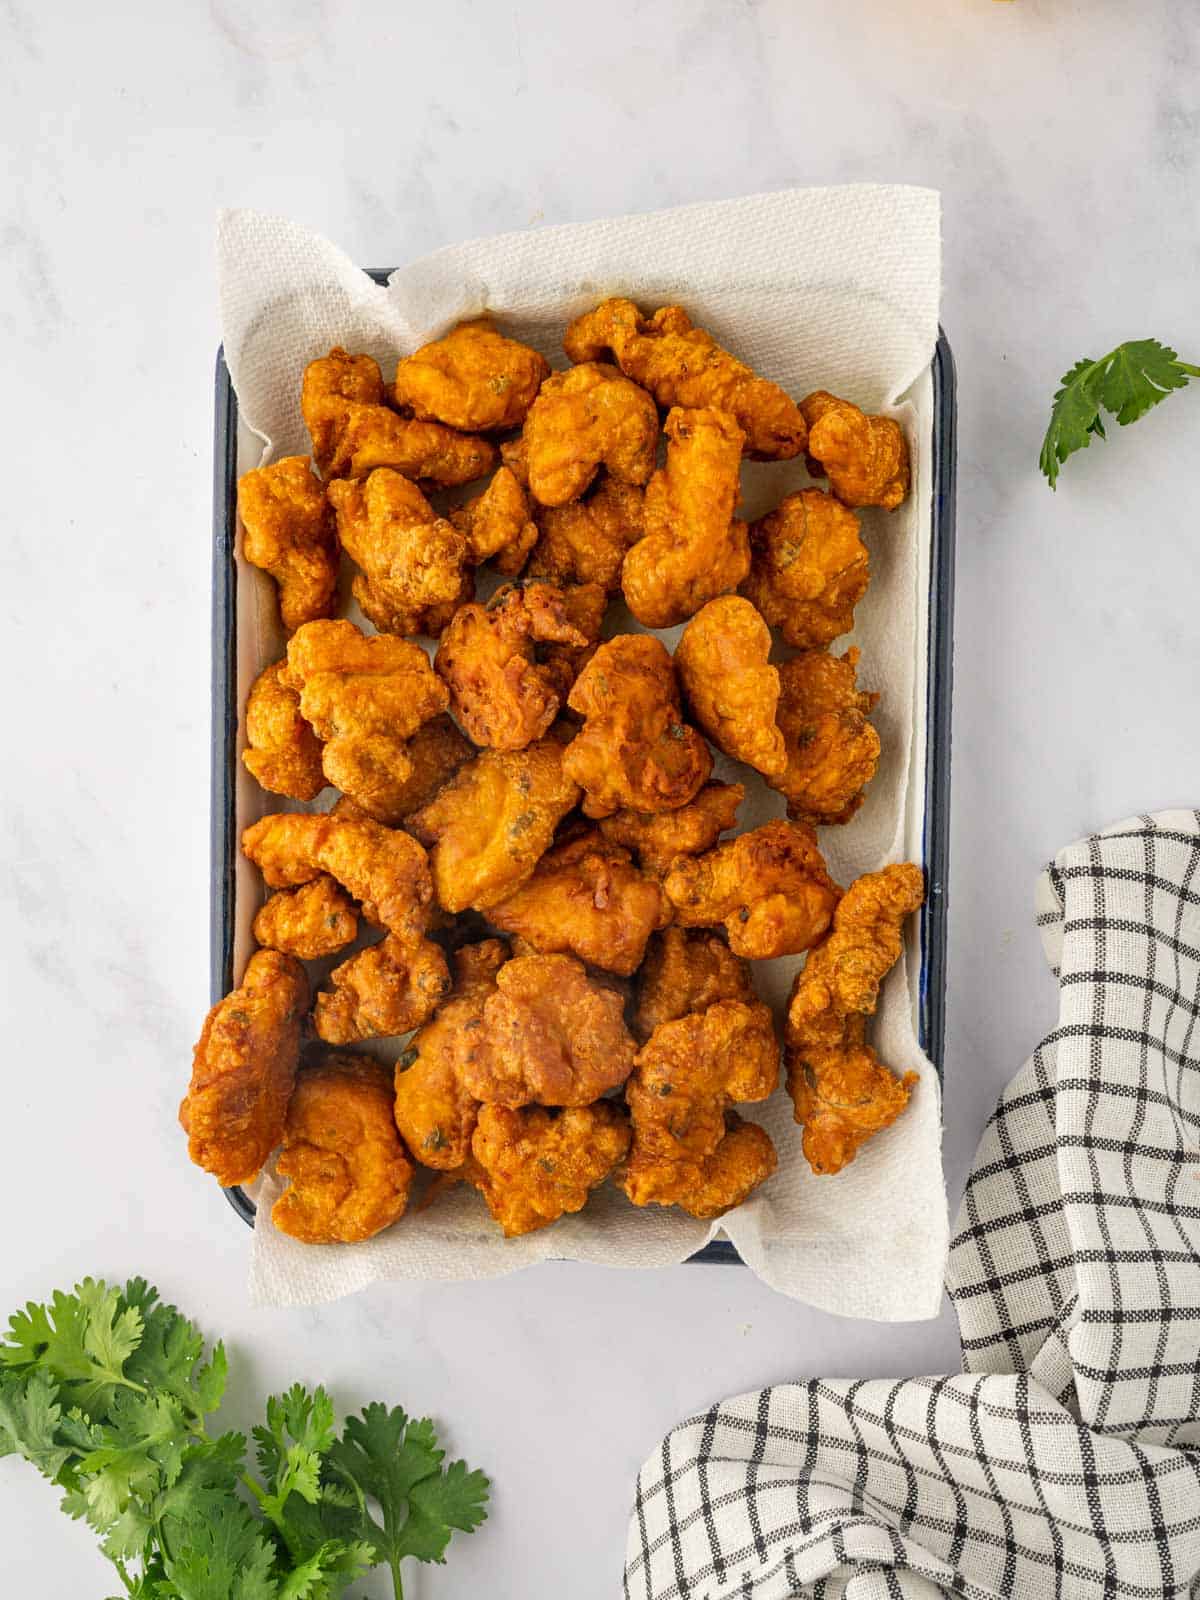 Fried chicken bites are draining on paper towels.